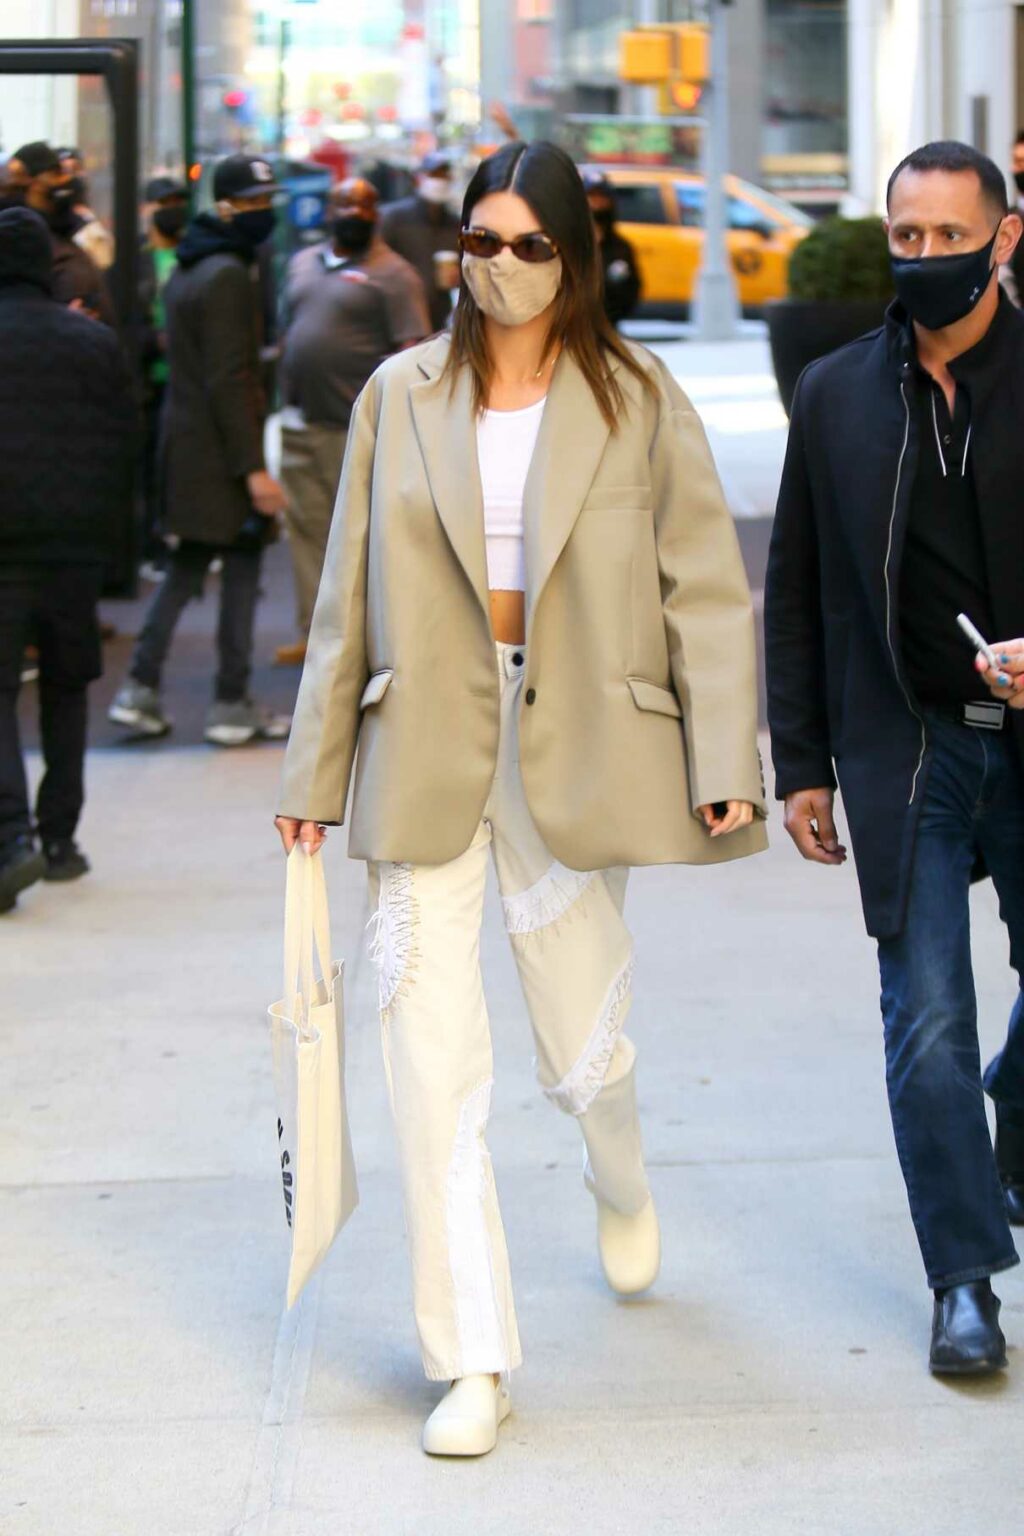 Kendall Jenner in a Beige Blazer Was Seen Out in New York City 04/26 ...